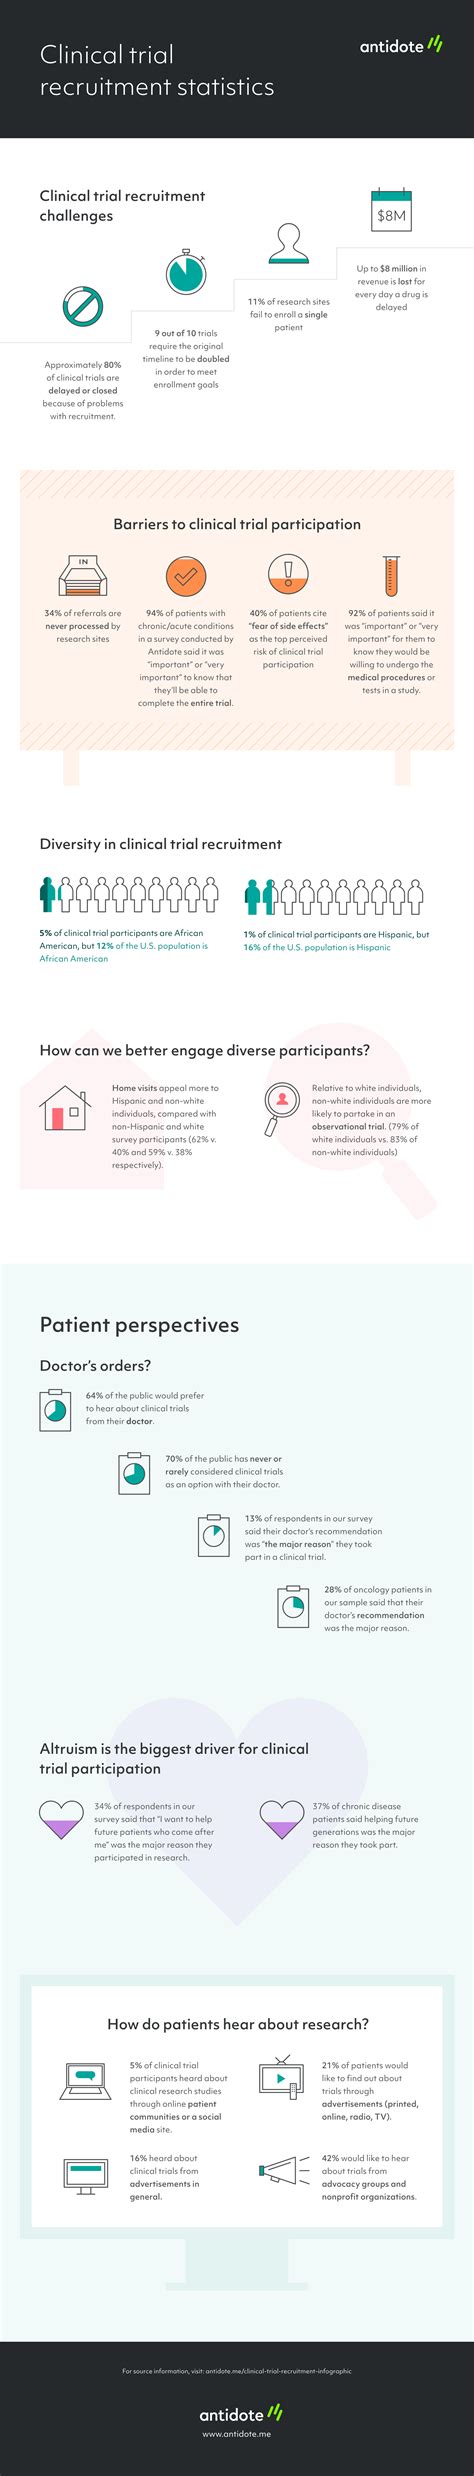 Clinical Trial Recruitment Infographic